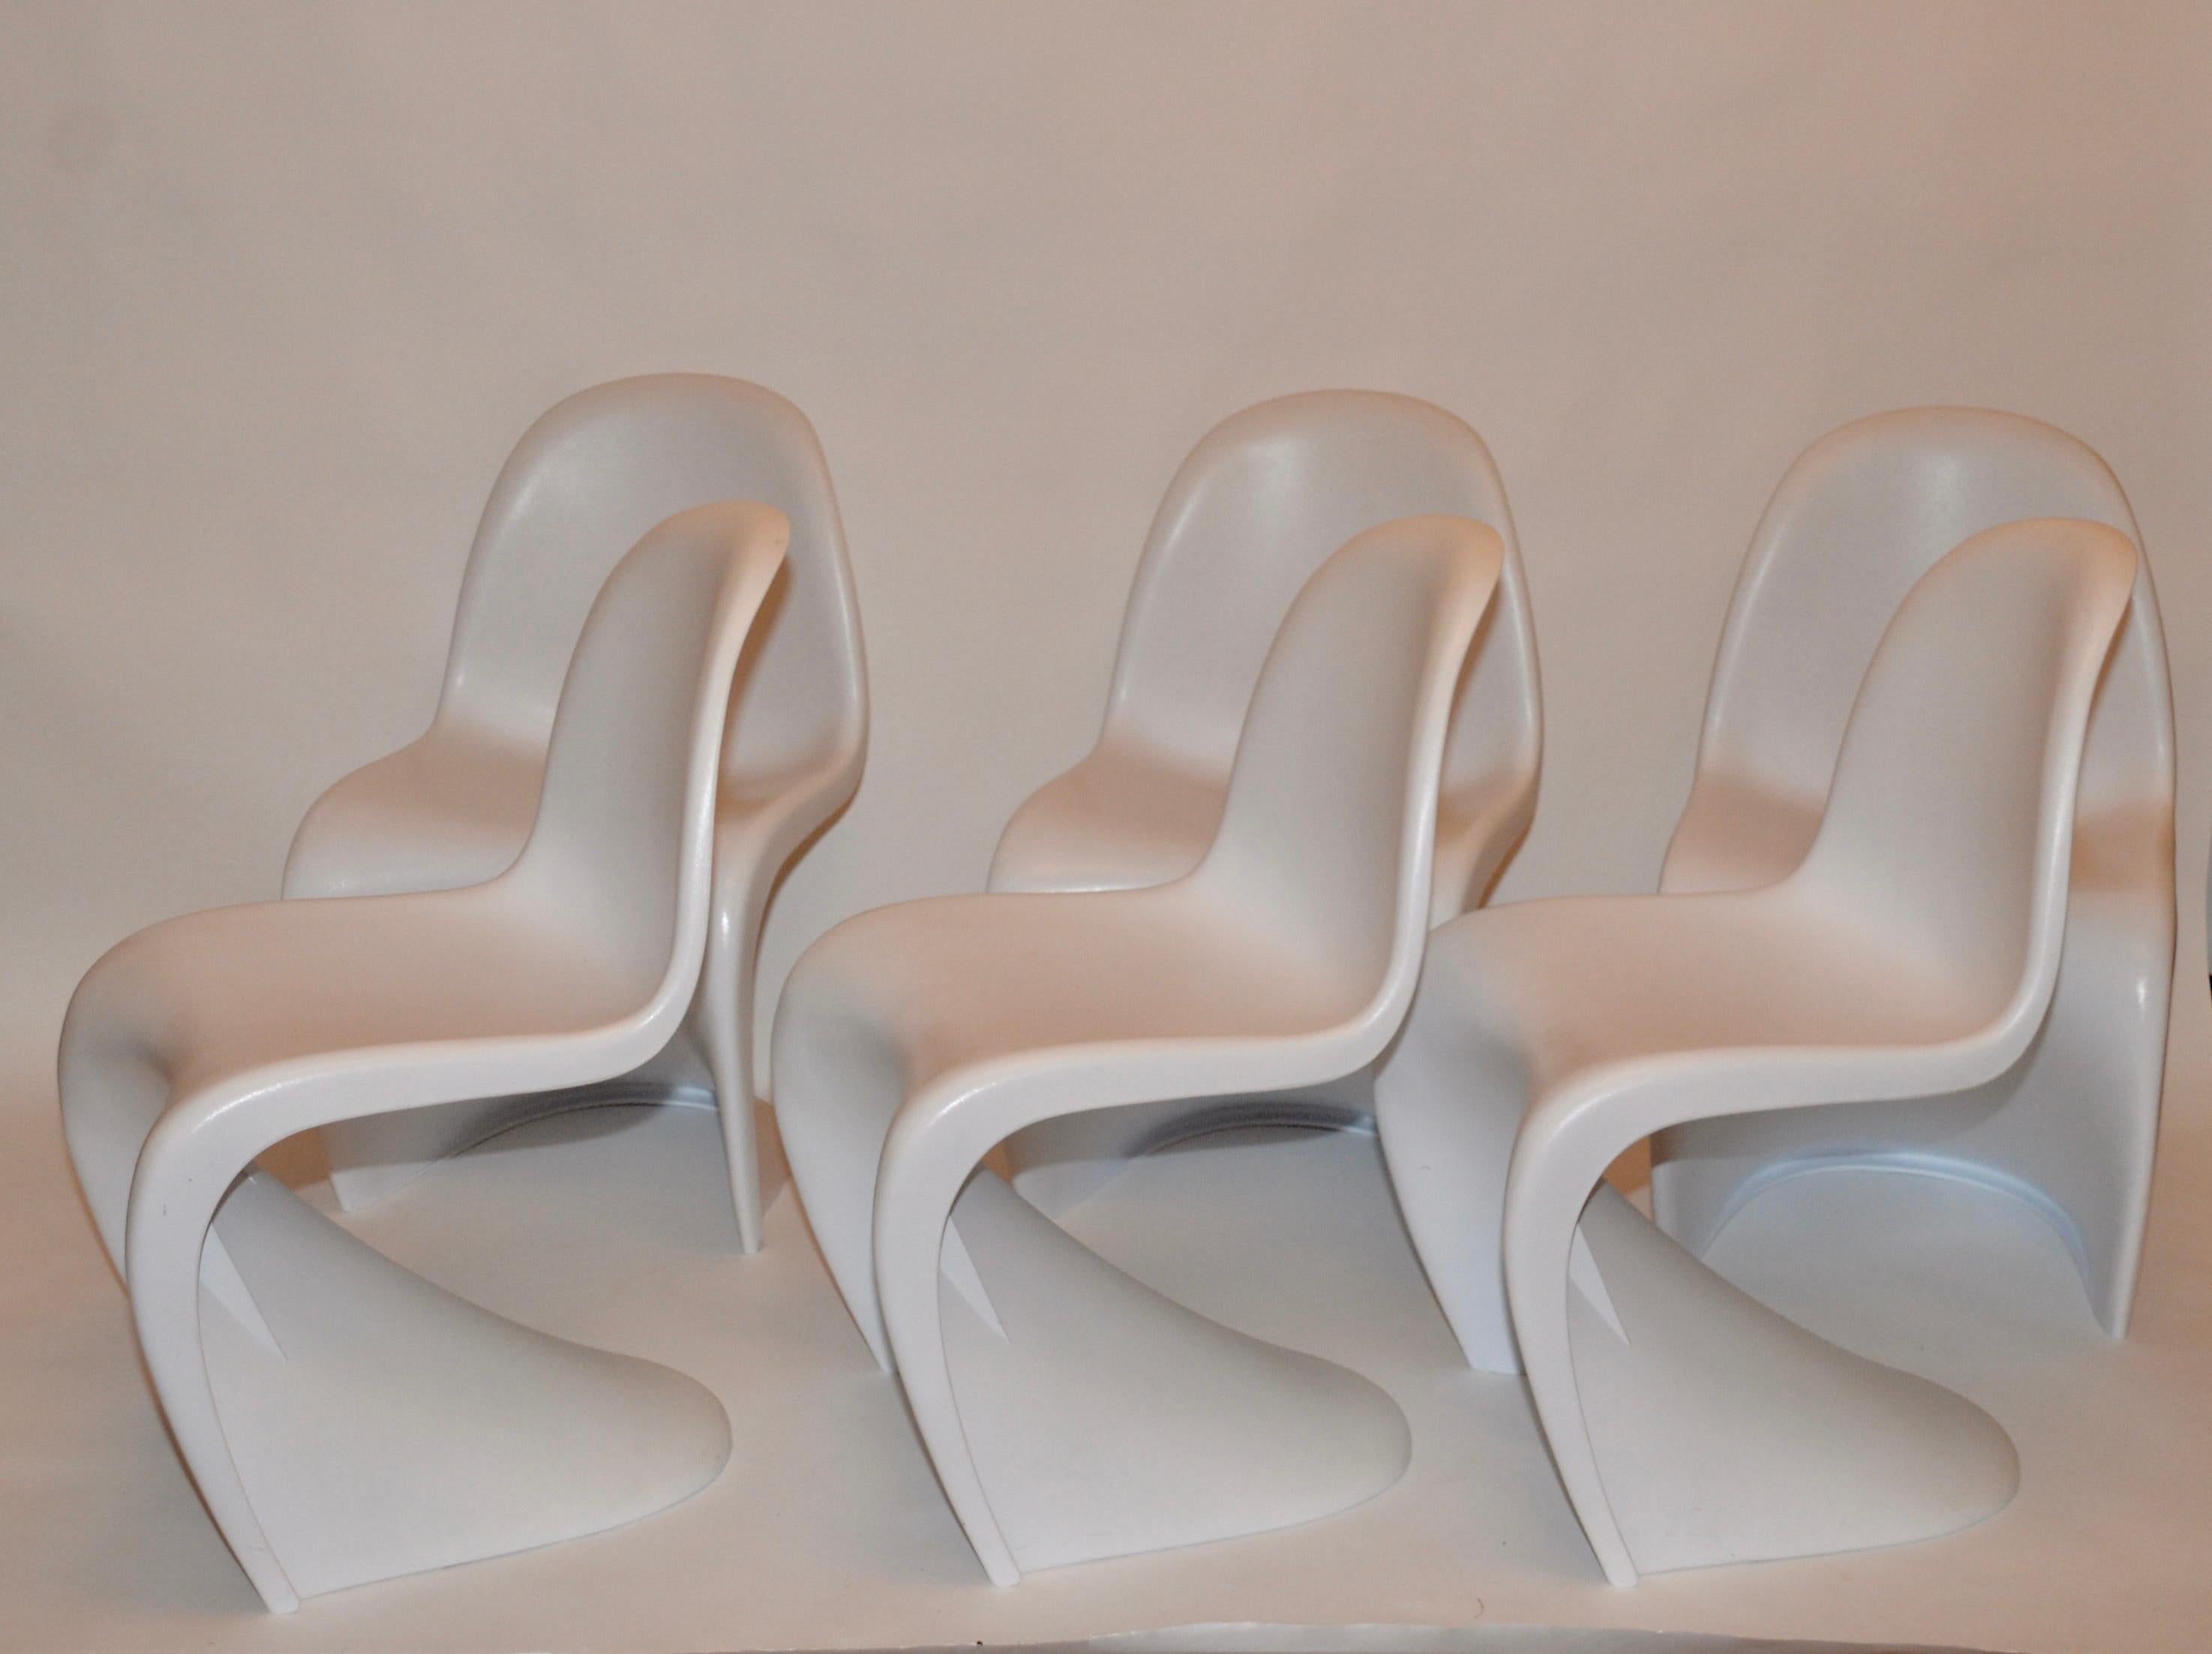 Mid-Century Modern Set of Six Chairs in the Style of the Verner Panton S Chair